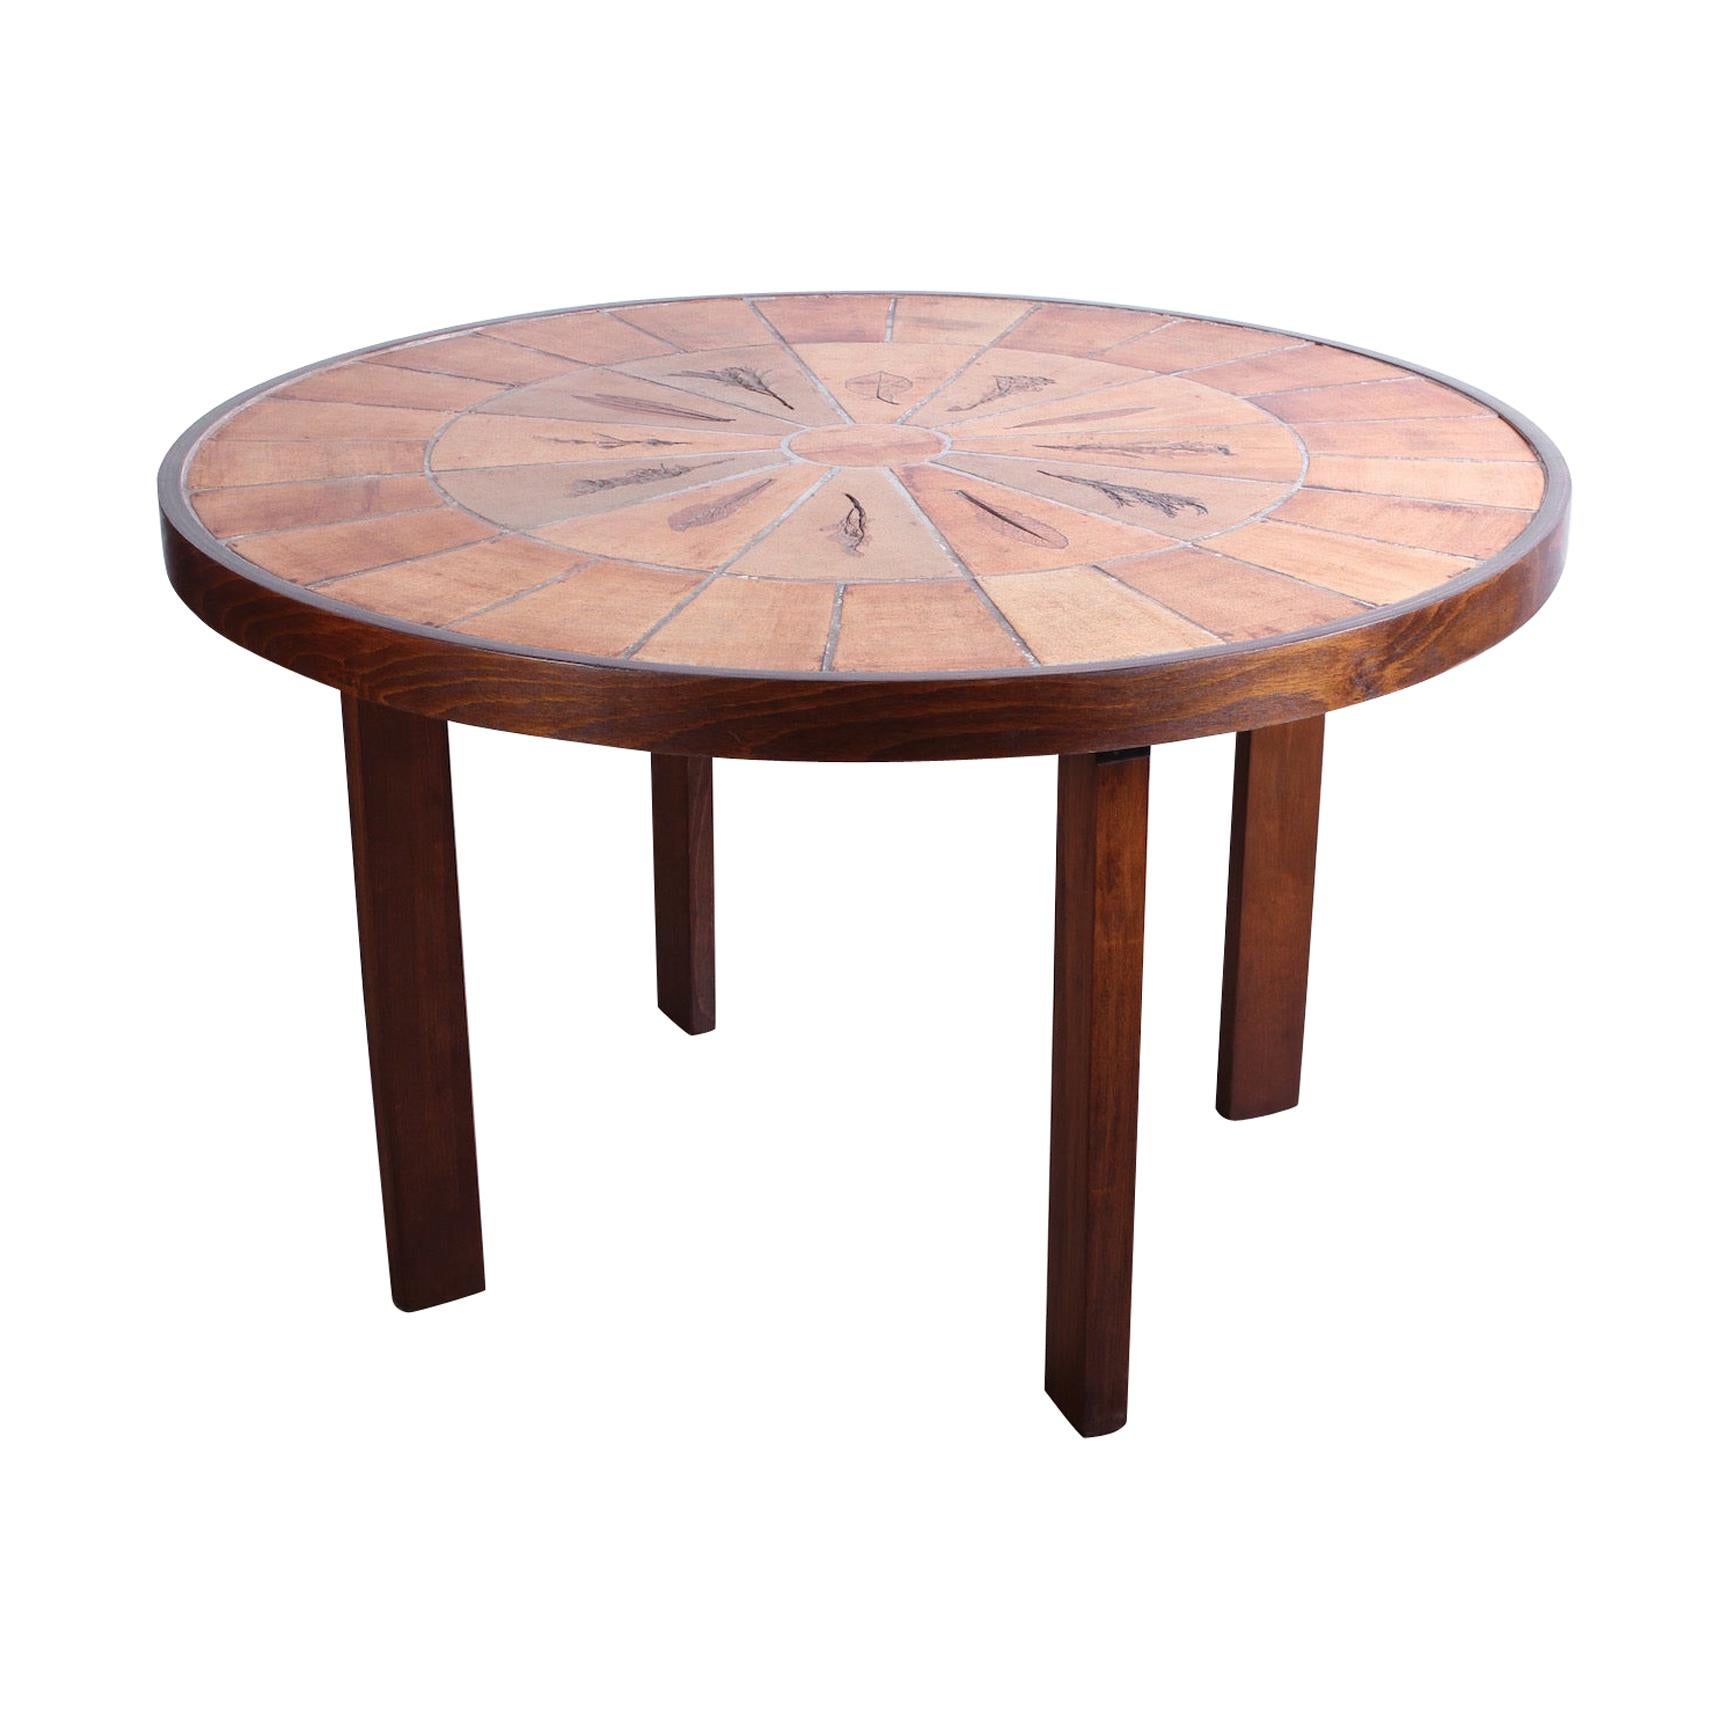 Roger Capron Tile Dining Table